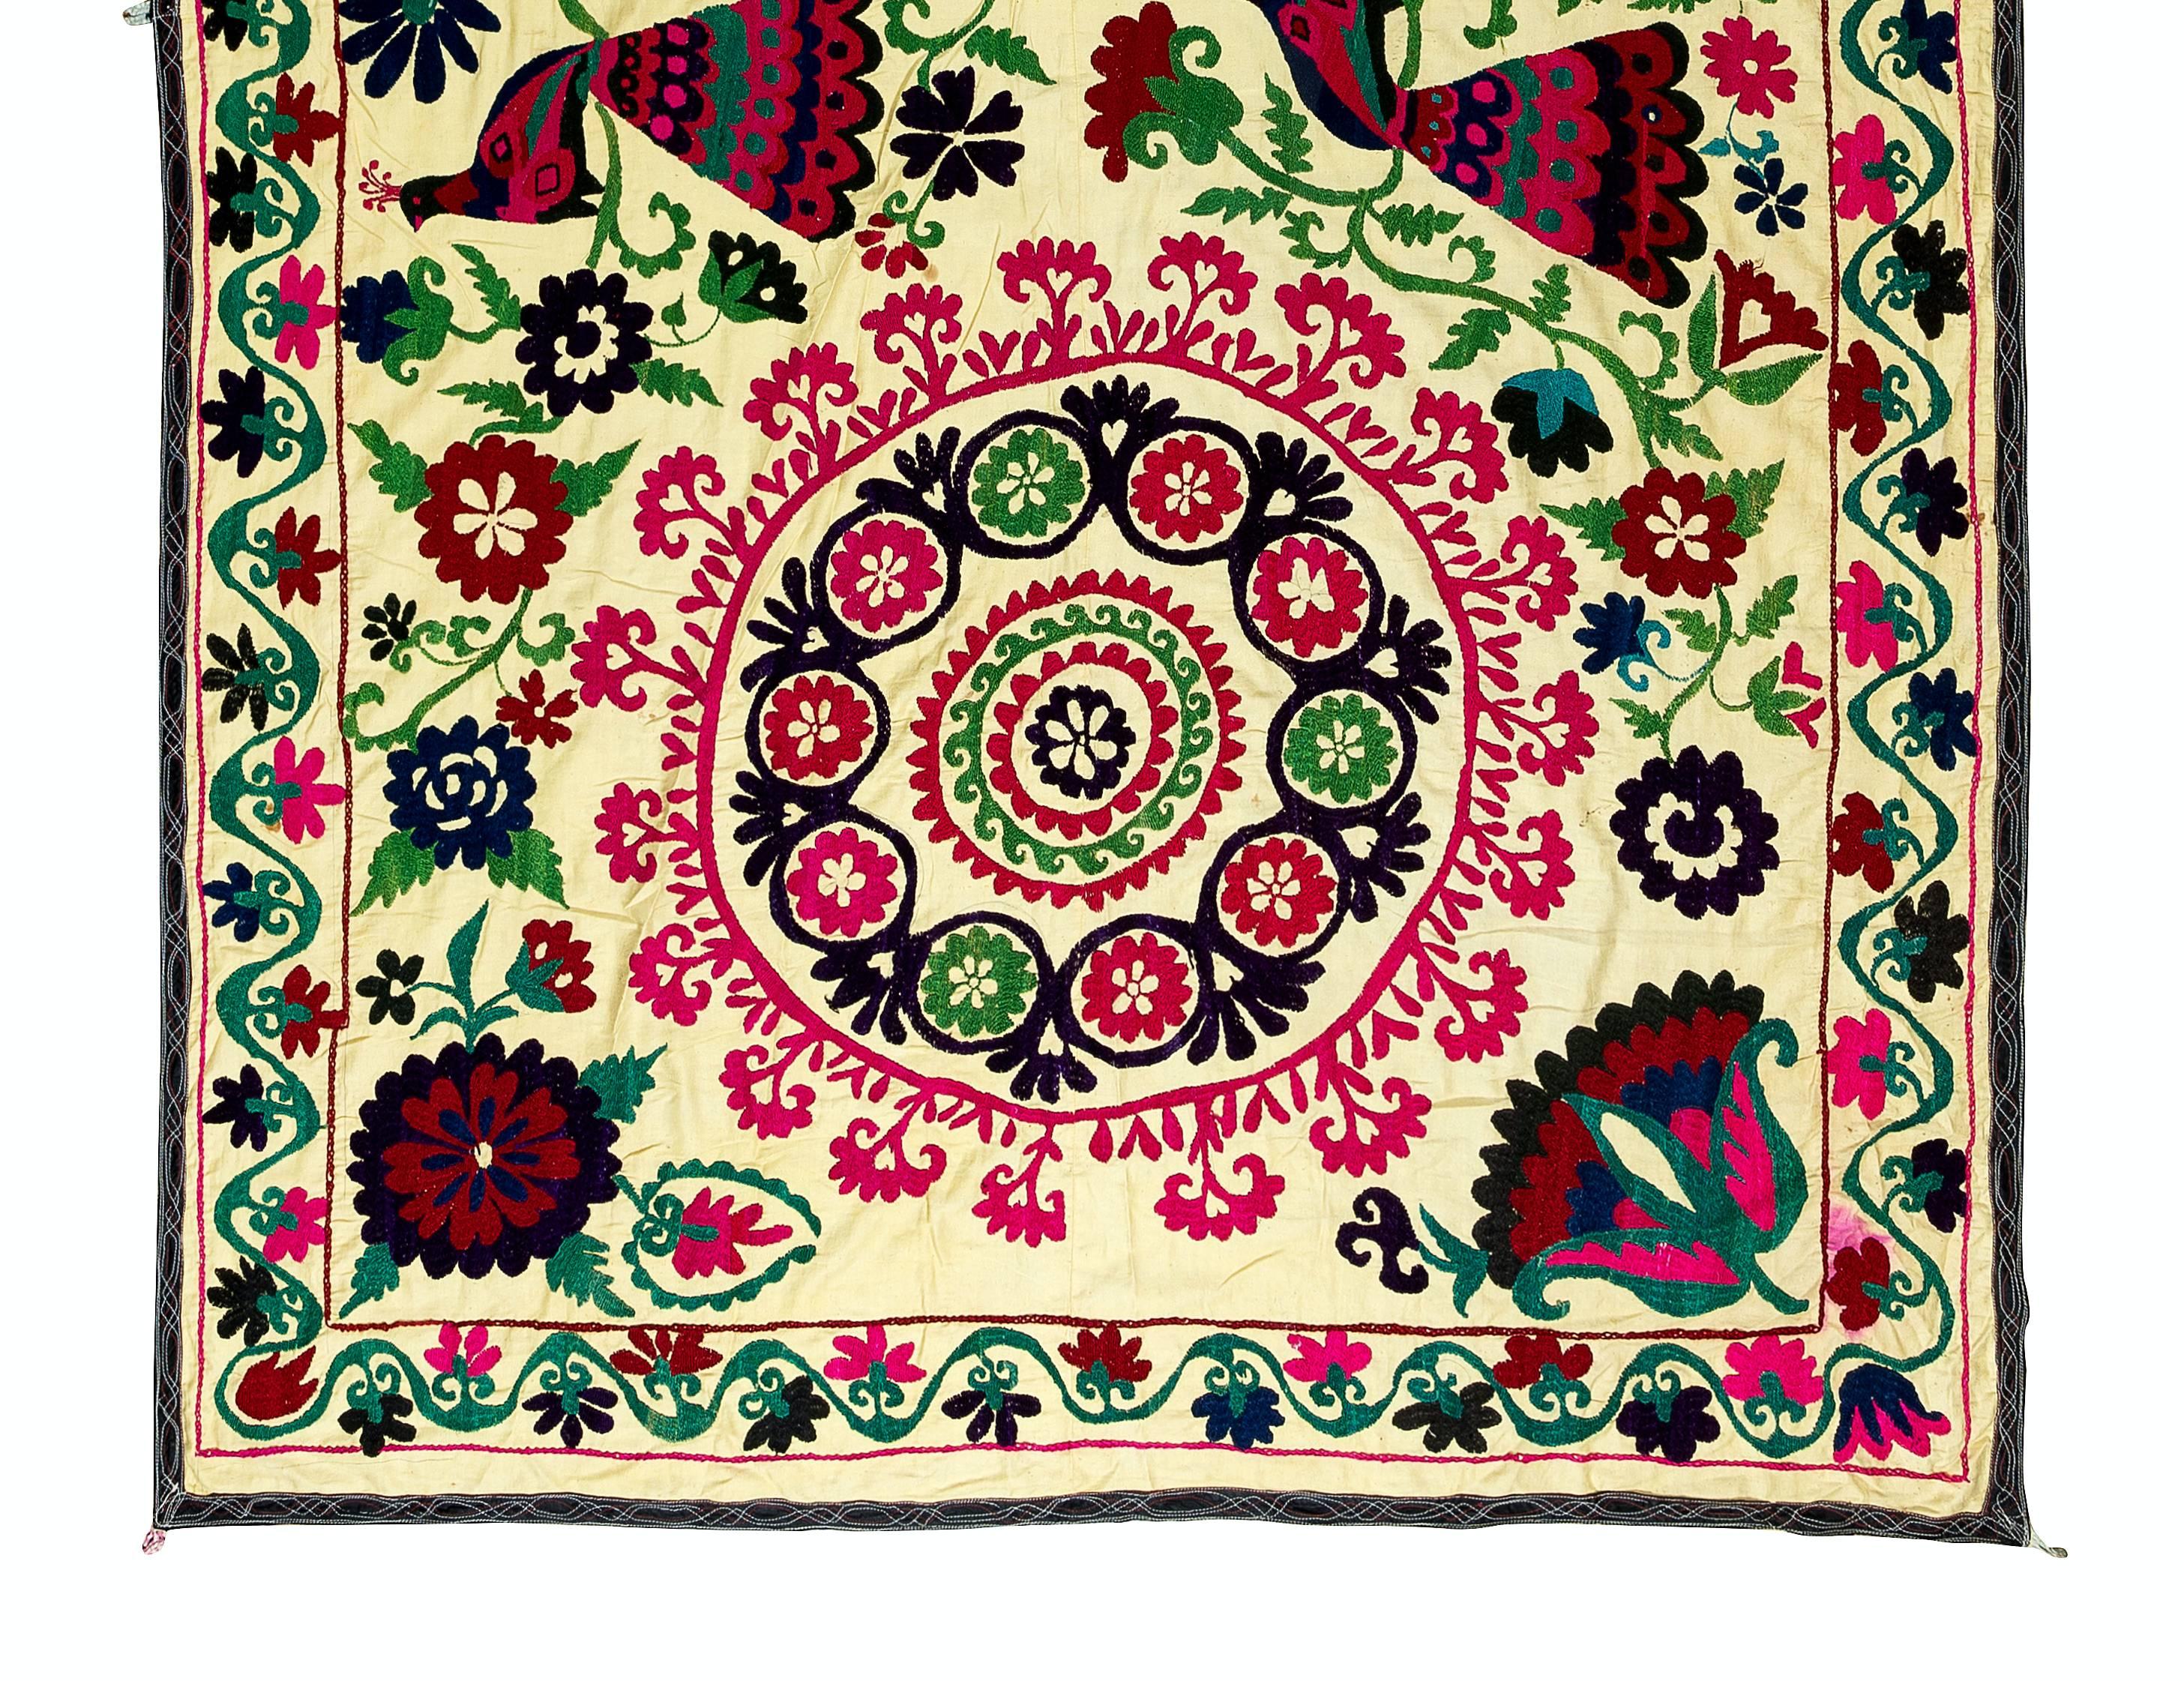 Embroidered 4.7x7.4 Ft Uzbek Silk Hand Embroidery Suzani Bed Cover, Vintage Wall Hanging For Sale